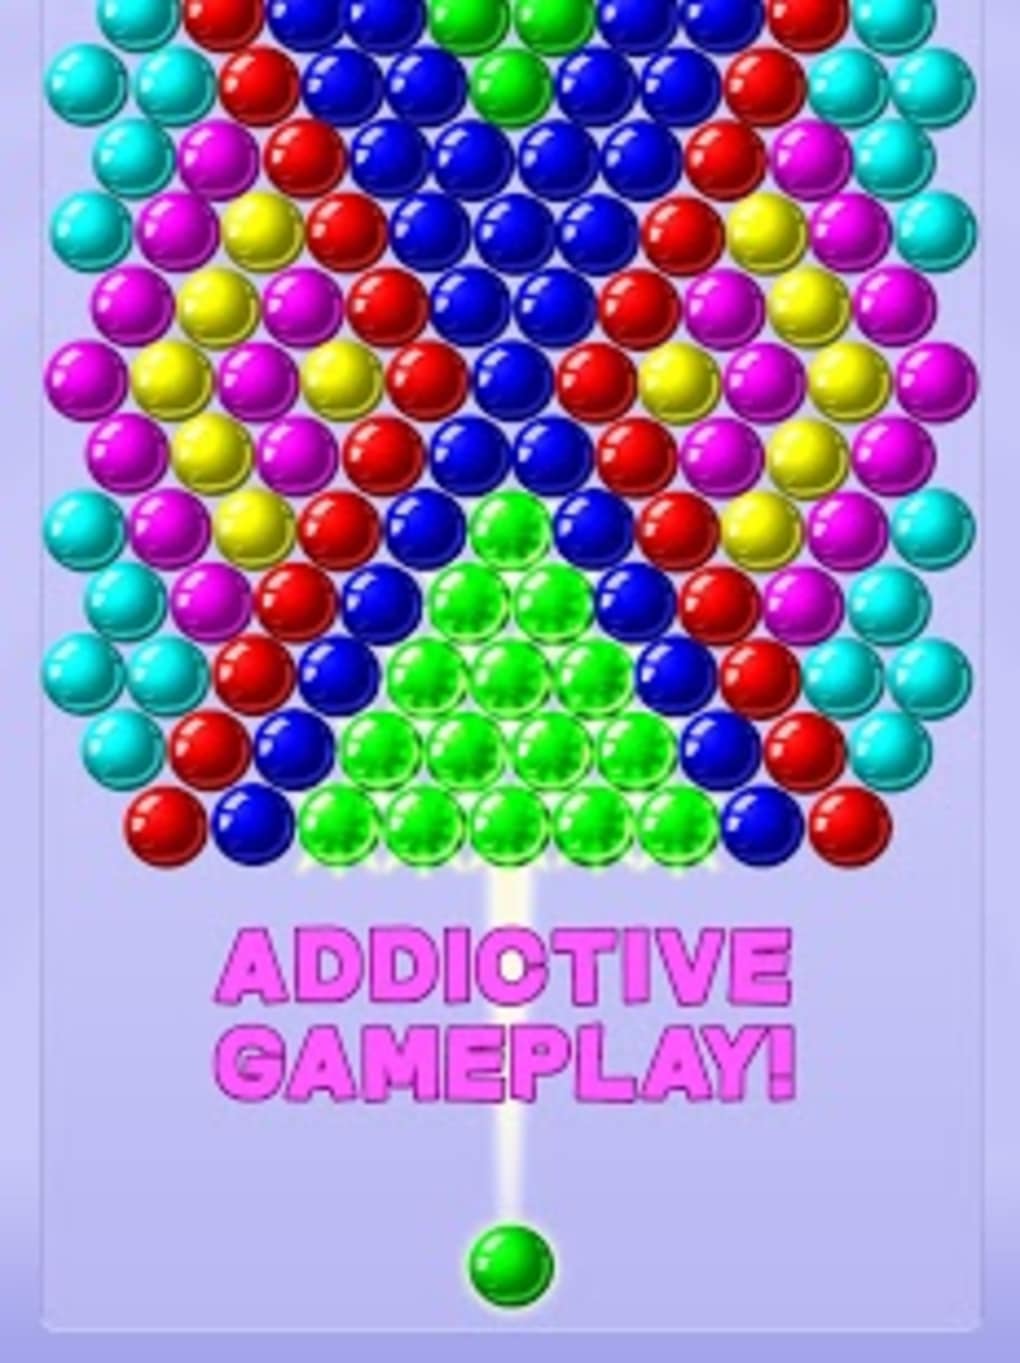 bubble shooter game free online full screen